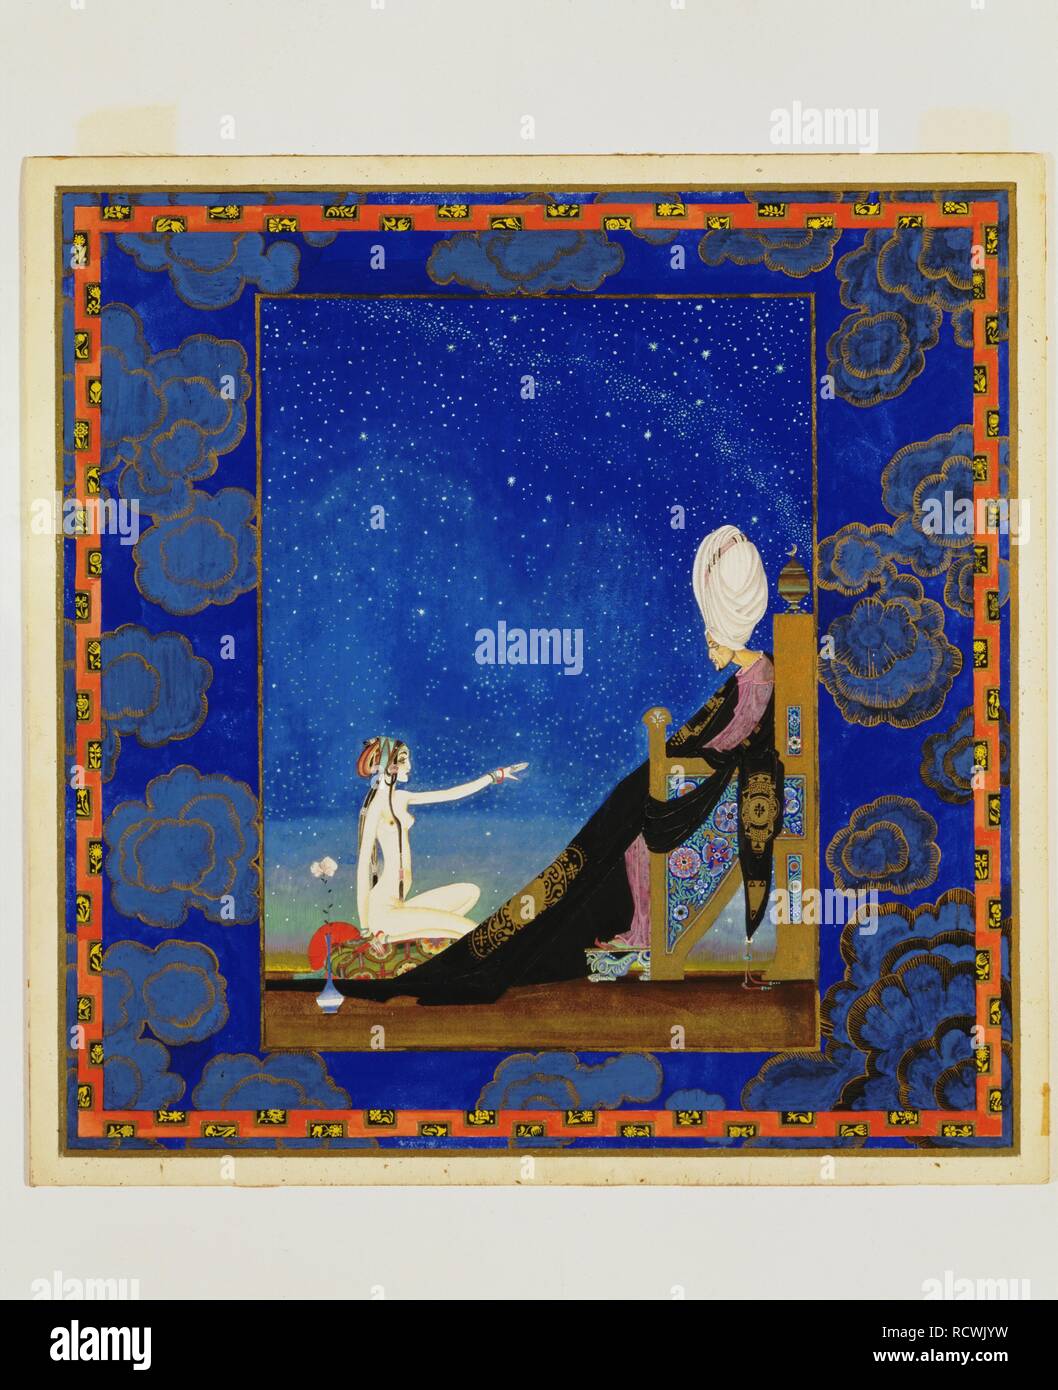 Arabian Nights. Museum: Hammer Museum Los Angeles. Author: Nielsen, Kay  Rasmus. Copyright: This artwork is not in public domain. It is your  responsibility to obtain all necessary third party permissions from the